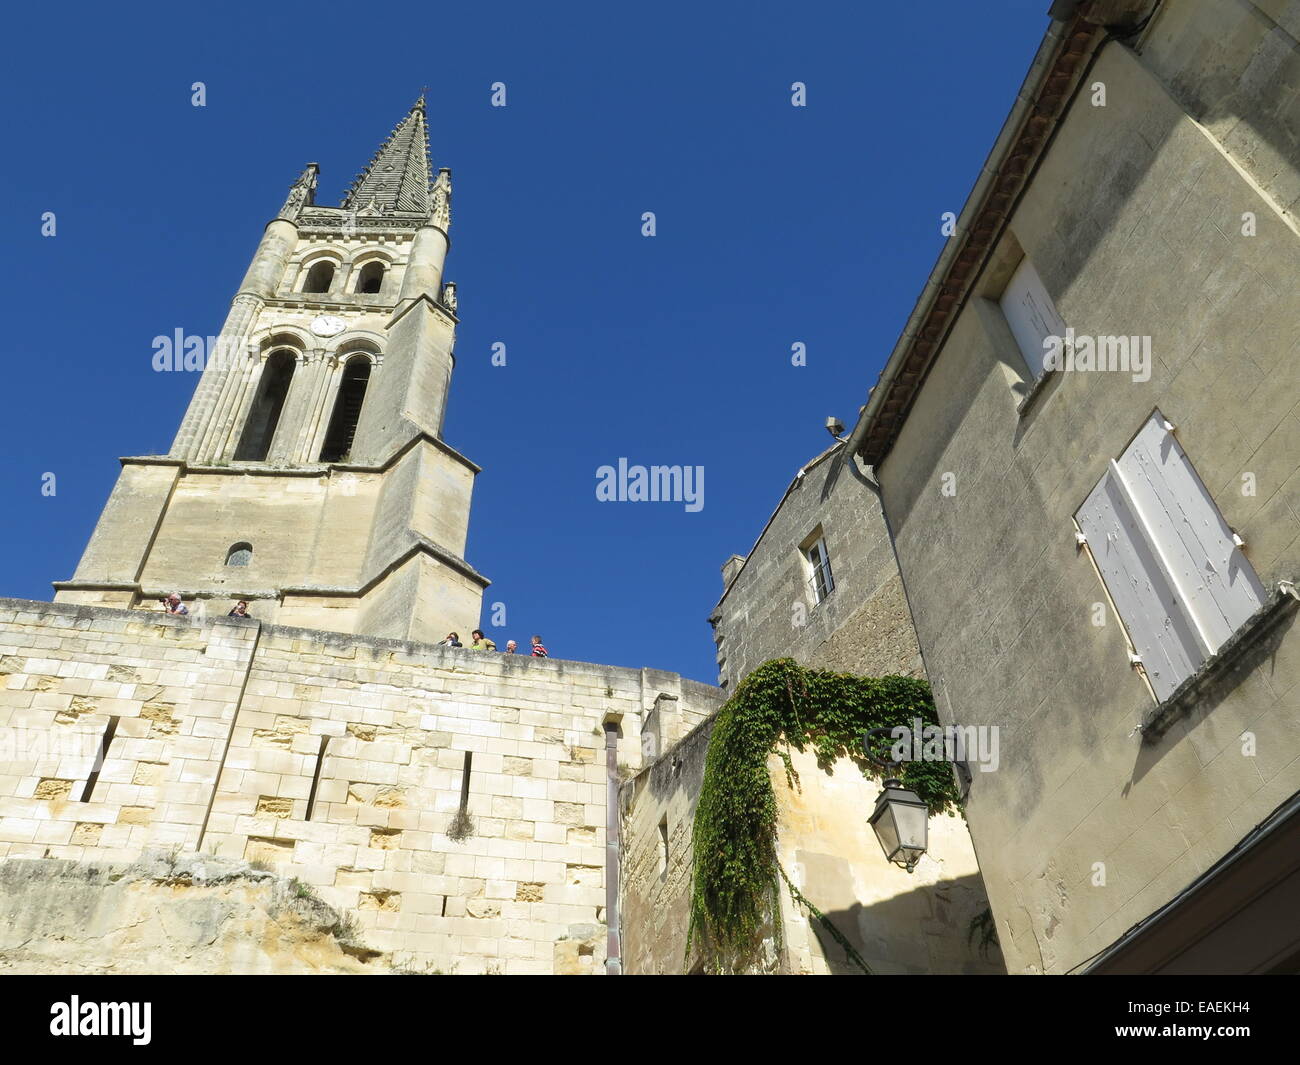 The Monolithic Church and Bell Tower at St Emilion, Bordeaux, France Stock Photo